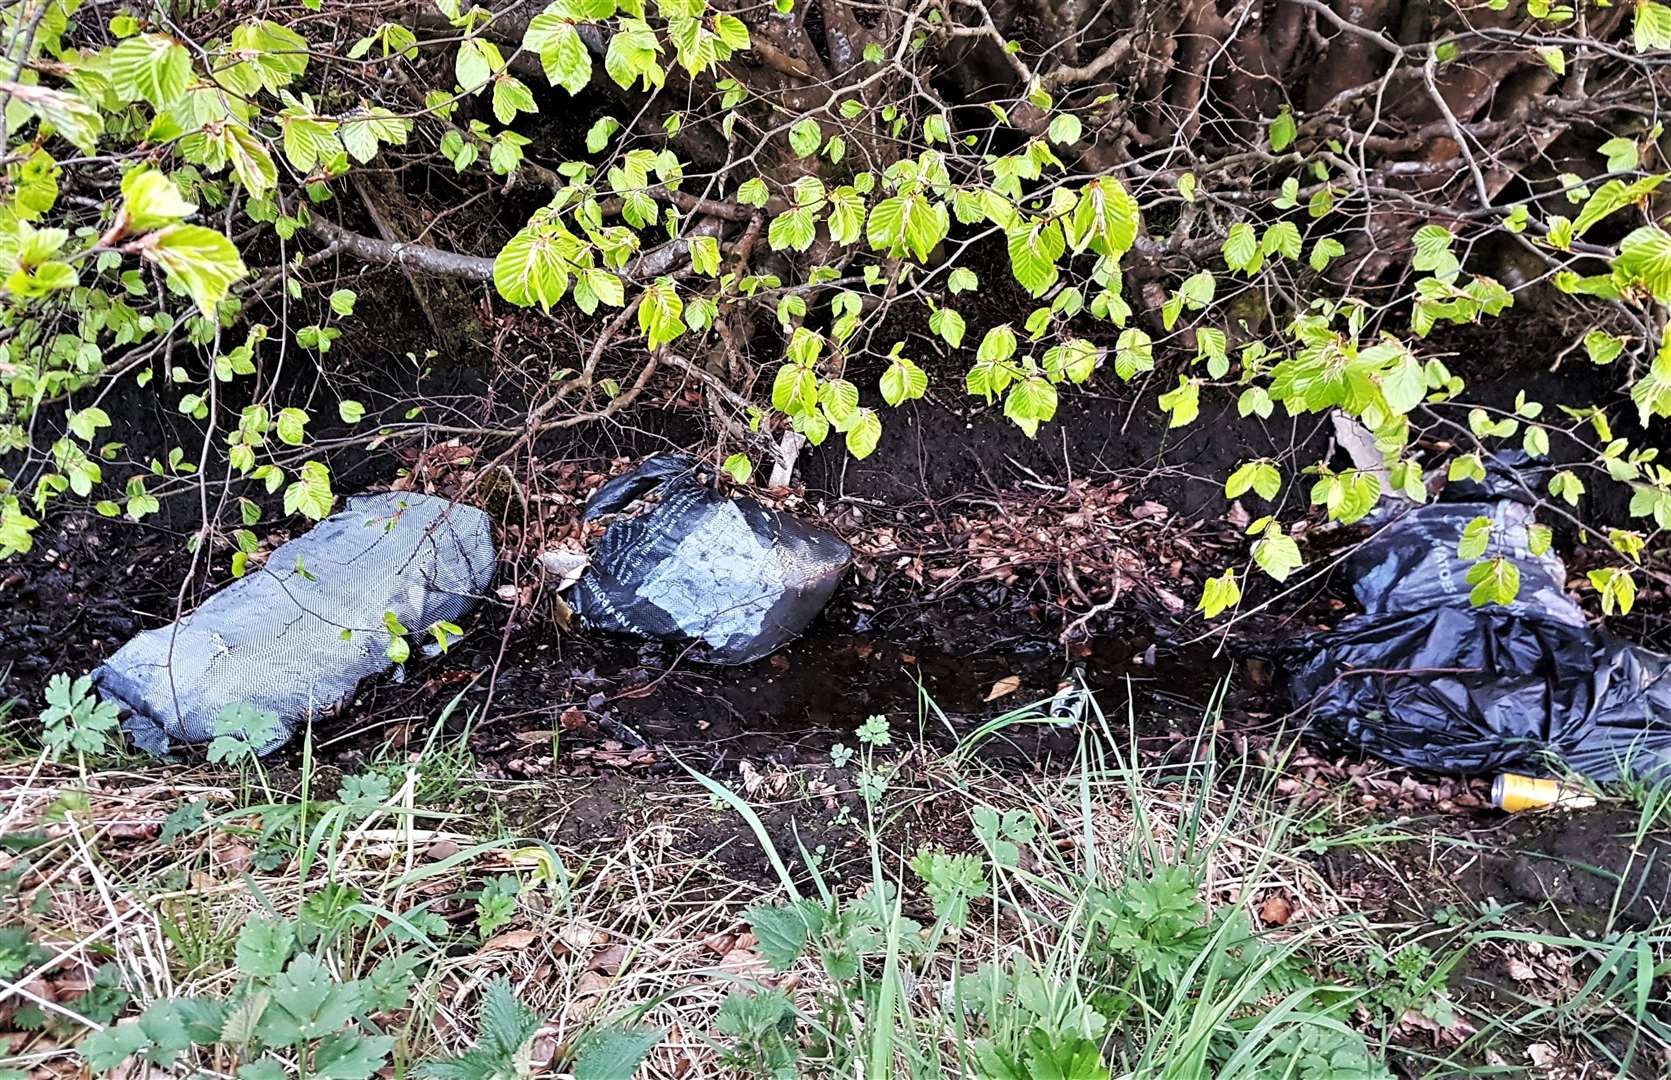 Rubbish ditched in rural Caithness, one of many fly-tipping incidents that have come to light recently.